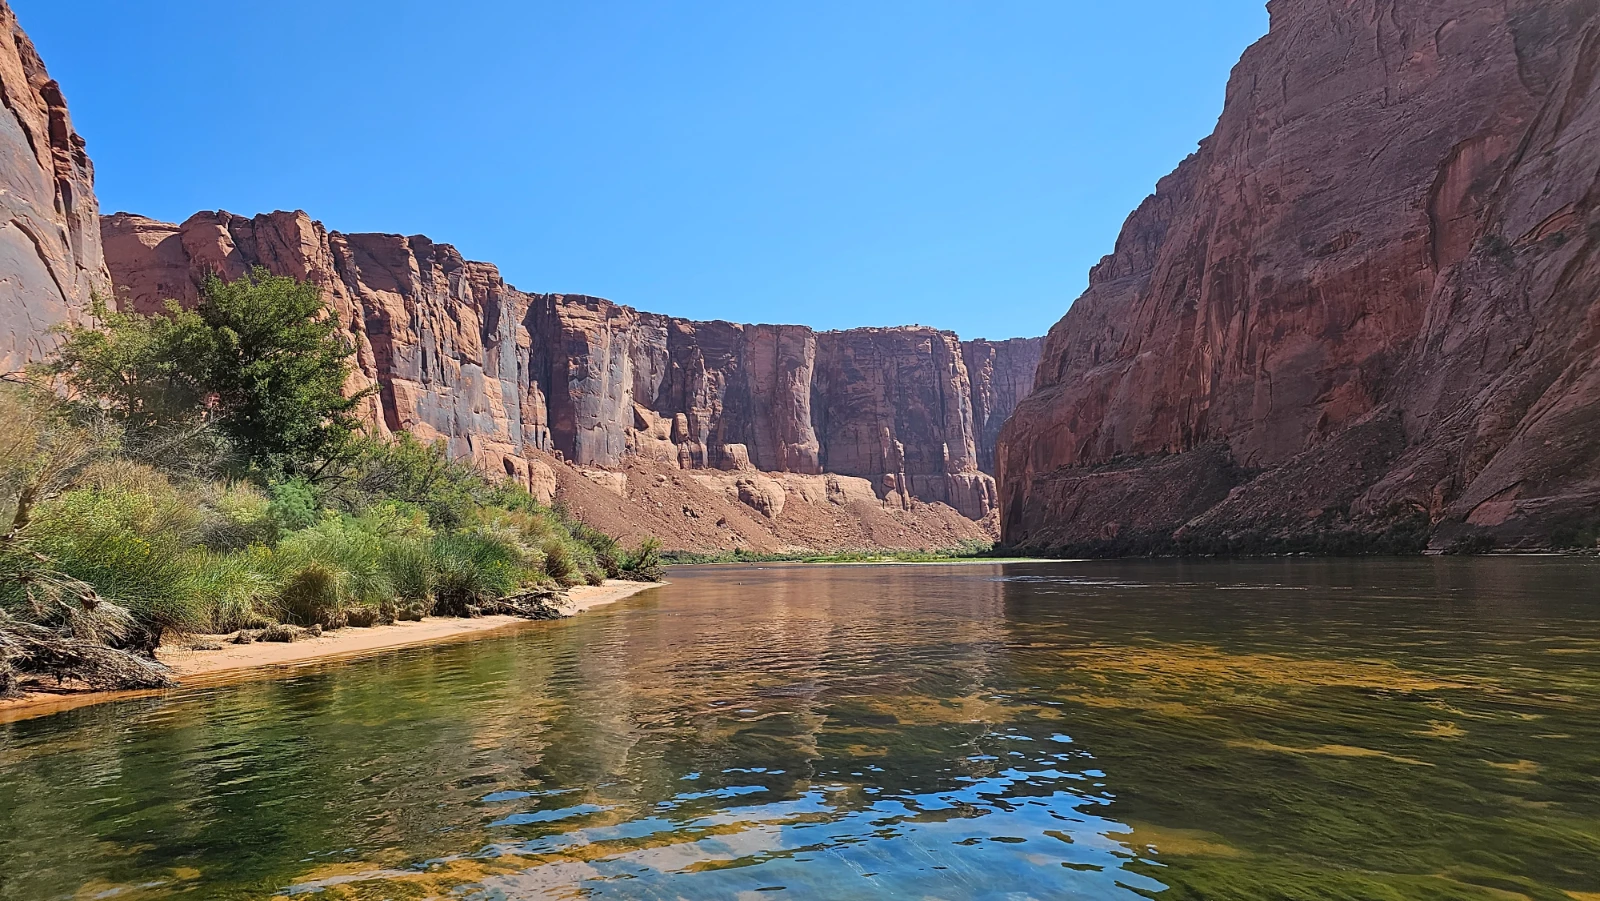 Starting to paddle through the actual Horseshoe Bend Segment. Photo Credit: Andy Goldberg